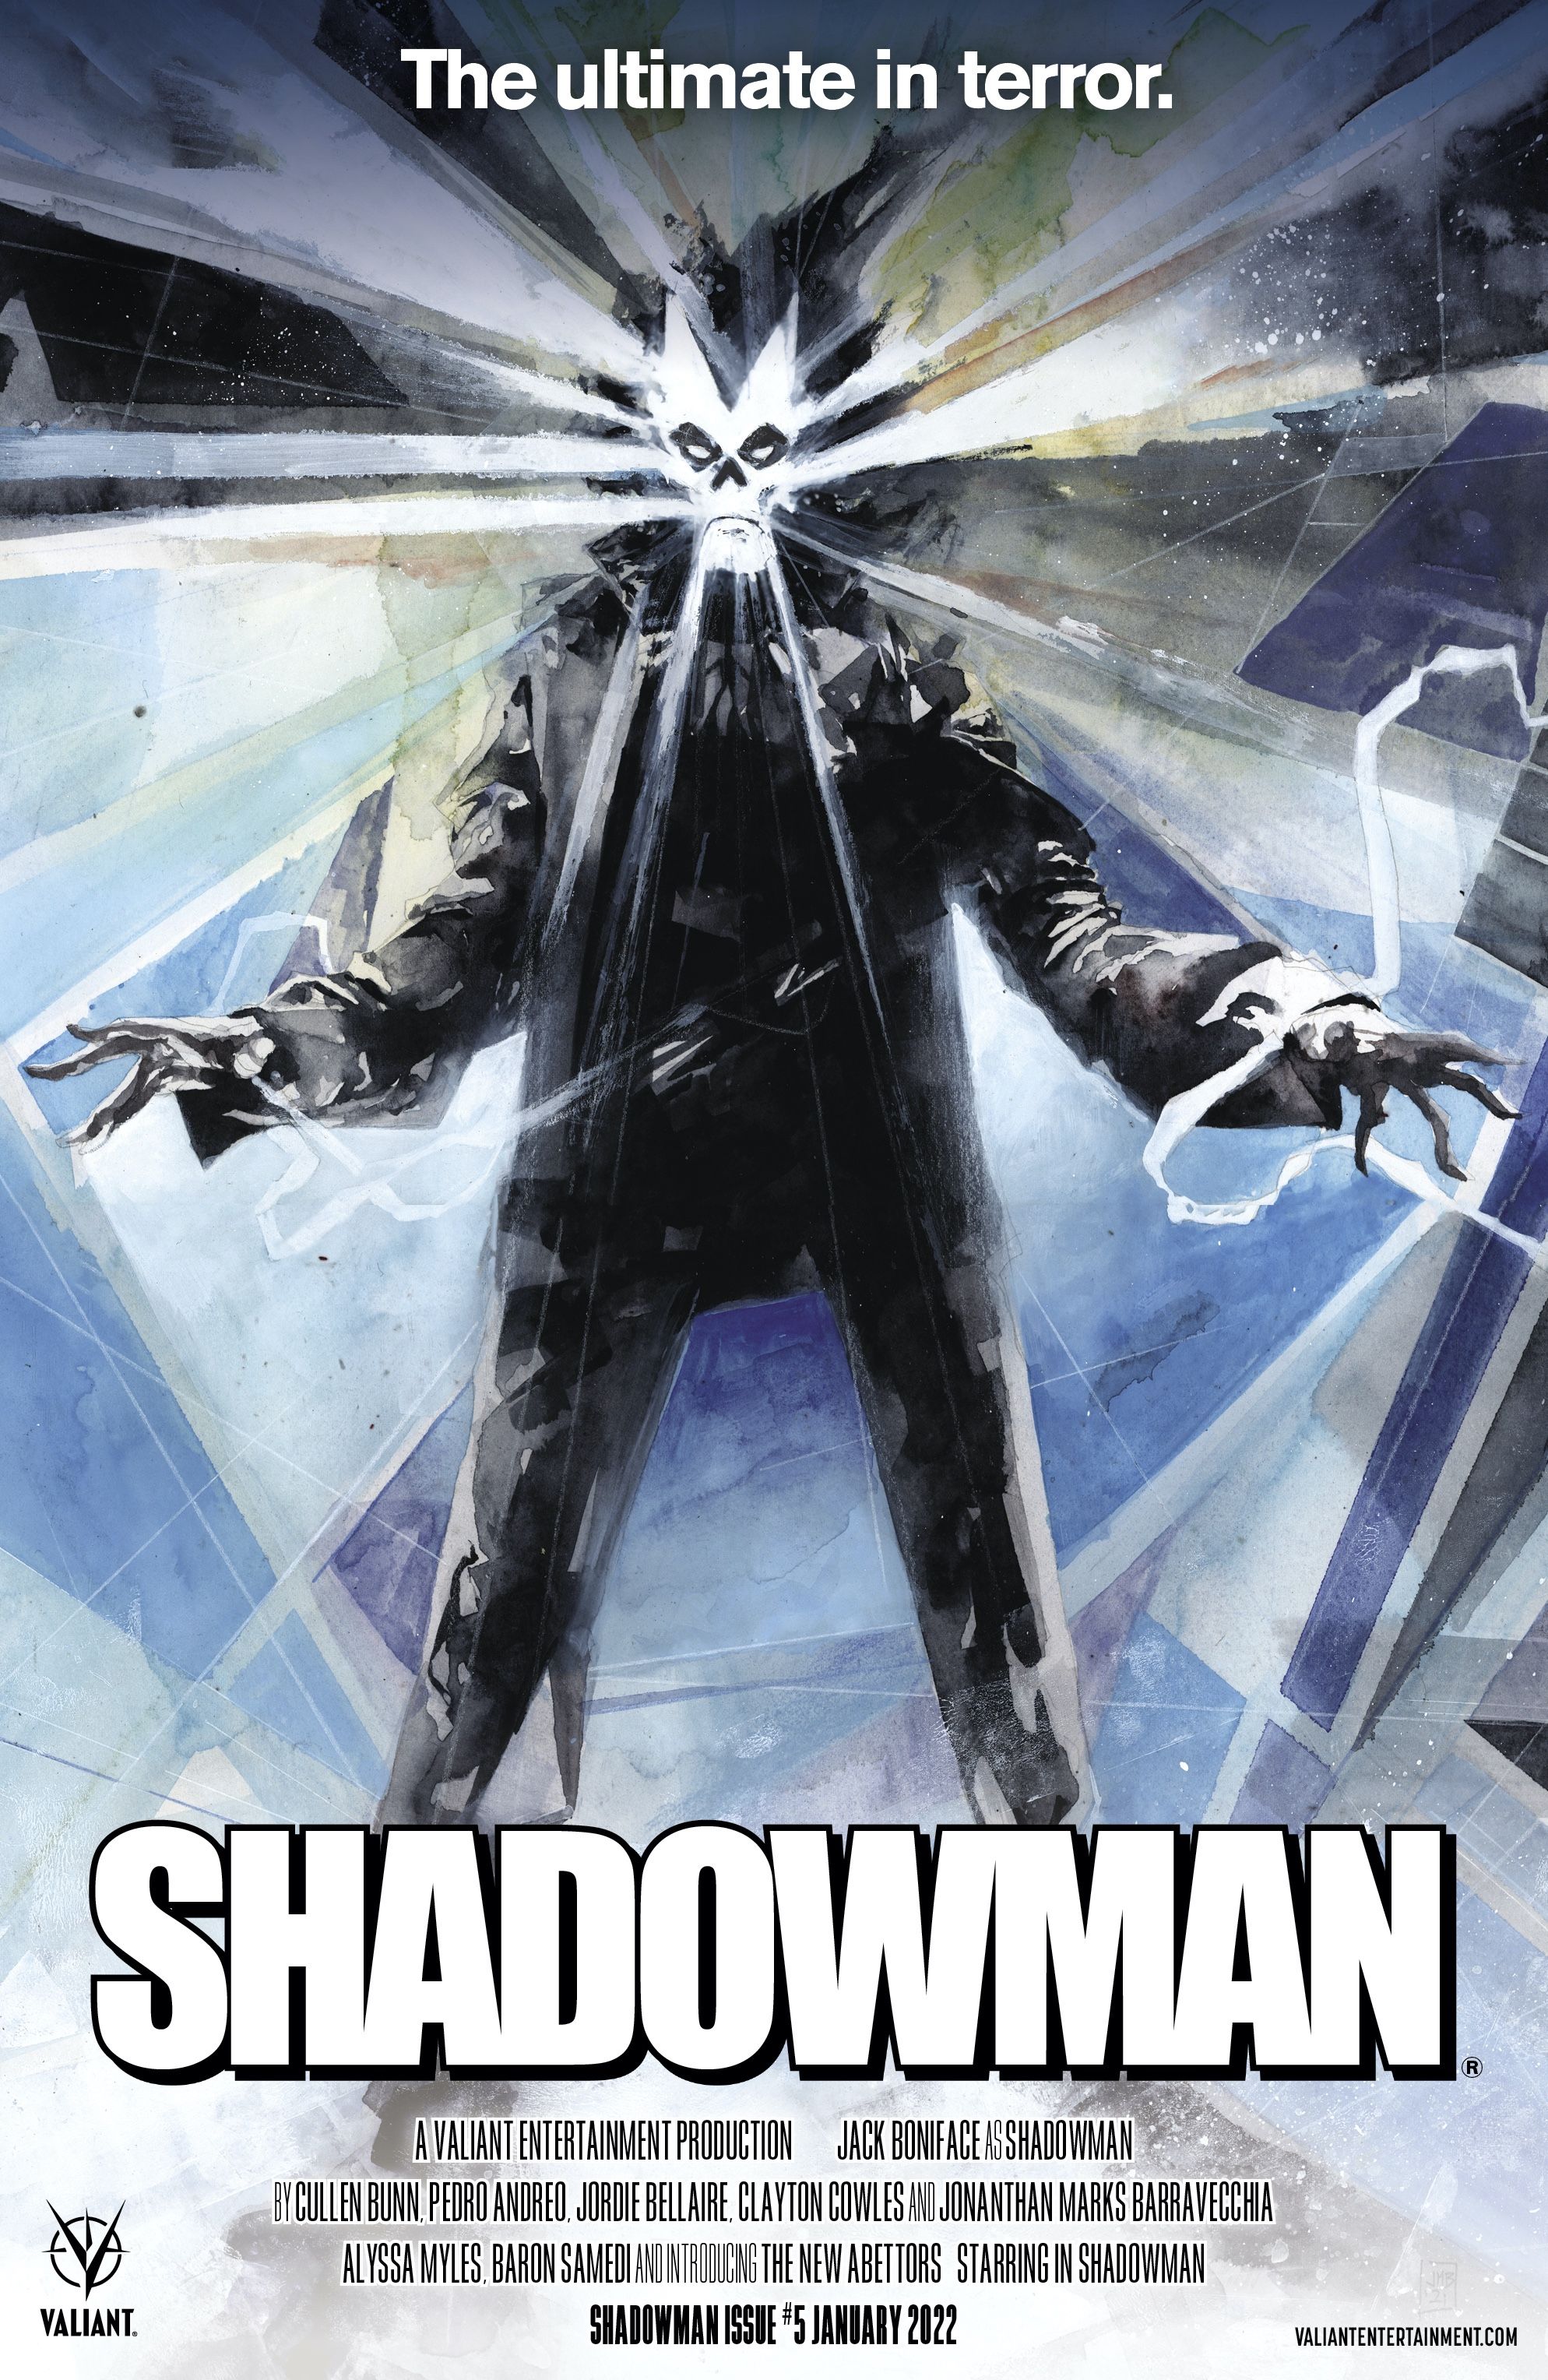 Shadowman Variant Cover Pays Homage to John Carpenter’s ‘The Thing’